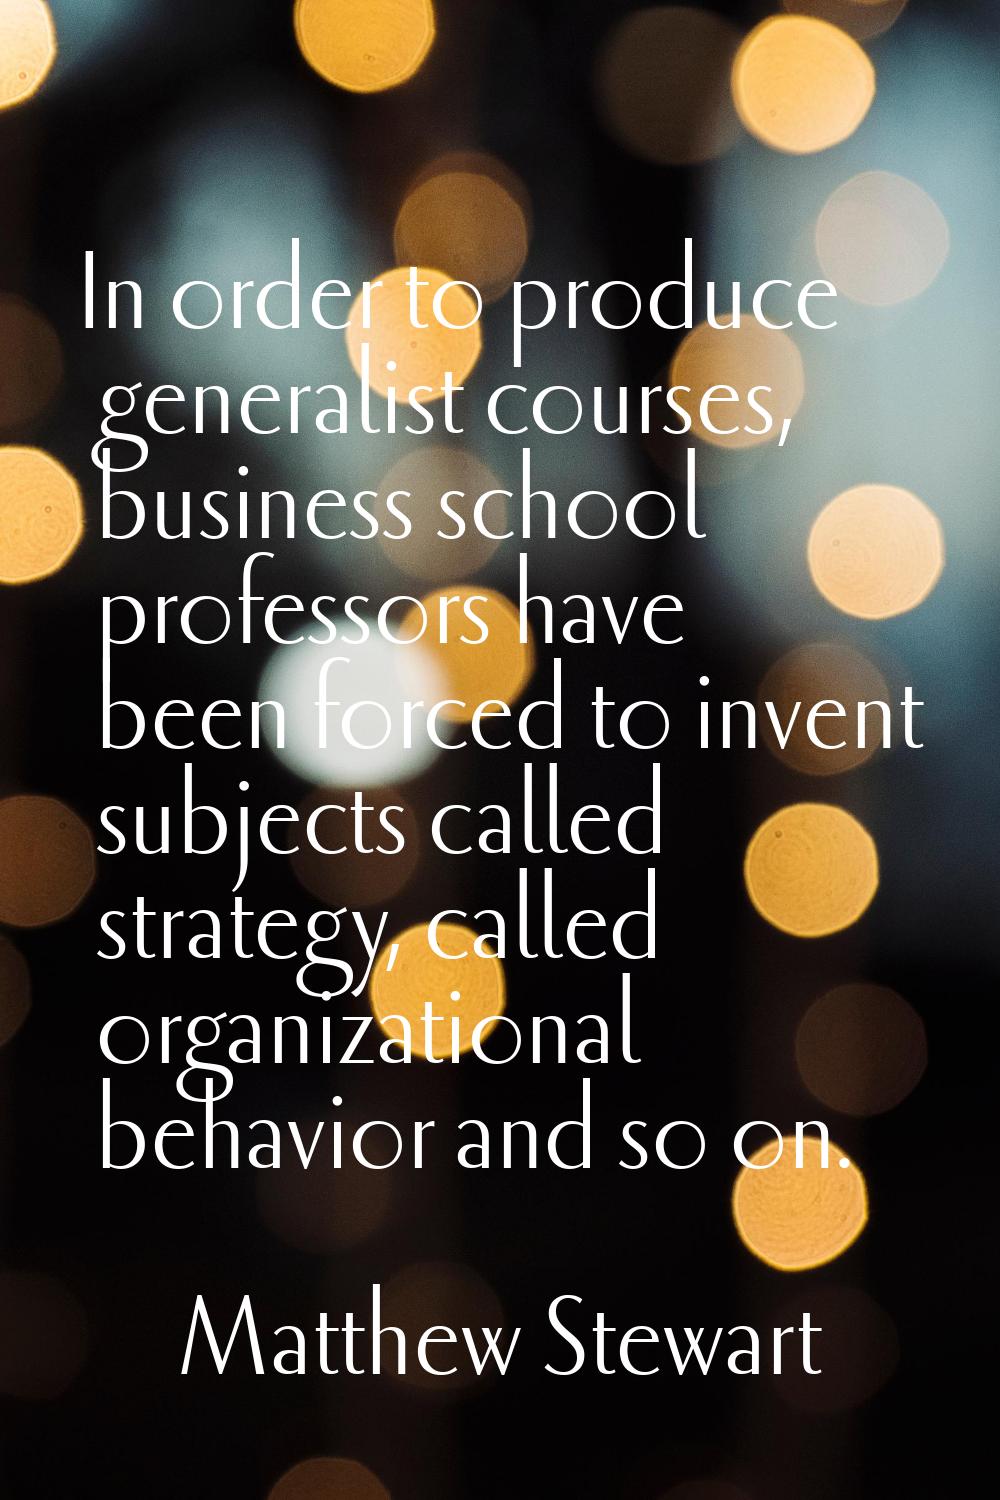 In order to produce generalist courses, business school professors have been forced to invent subje